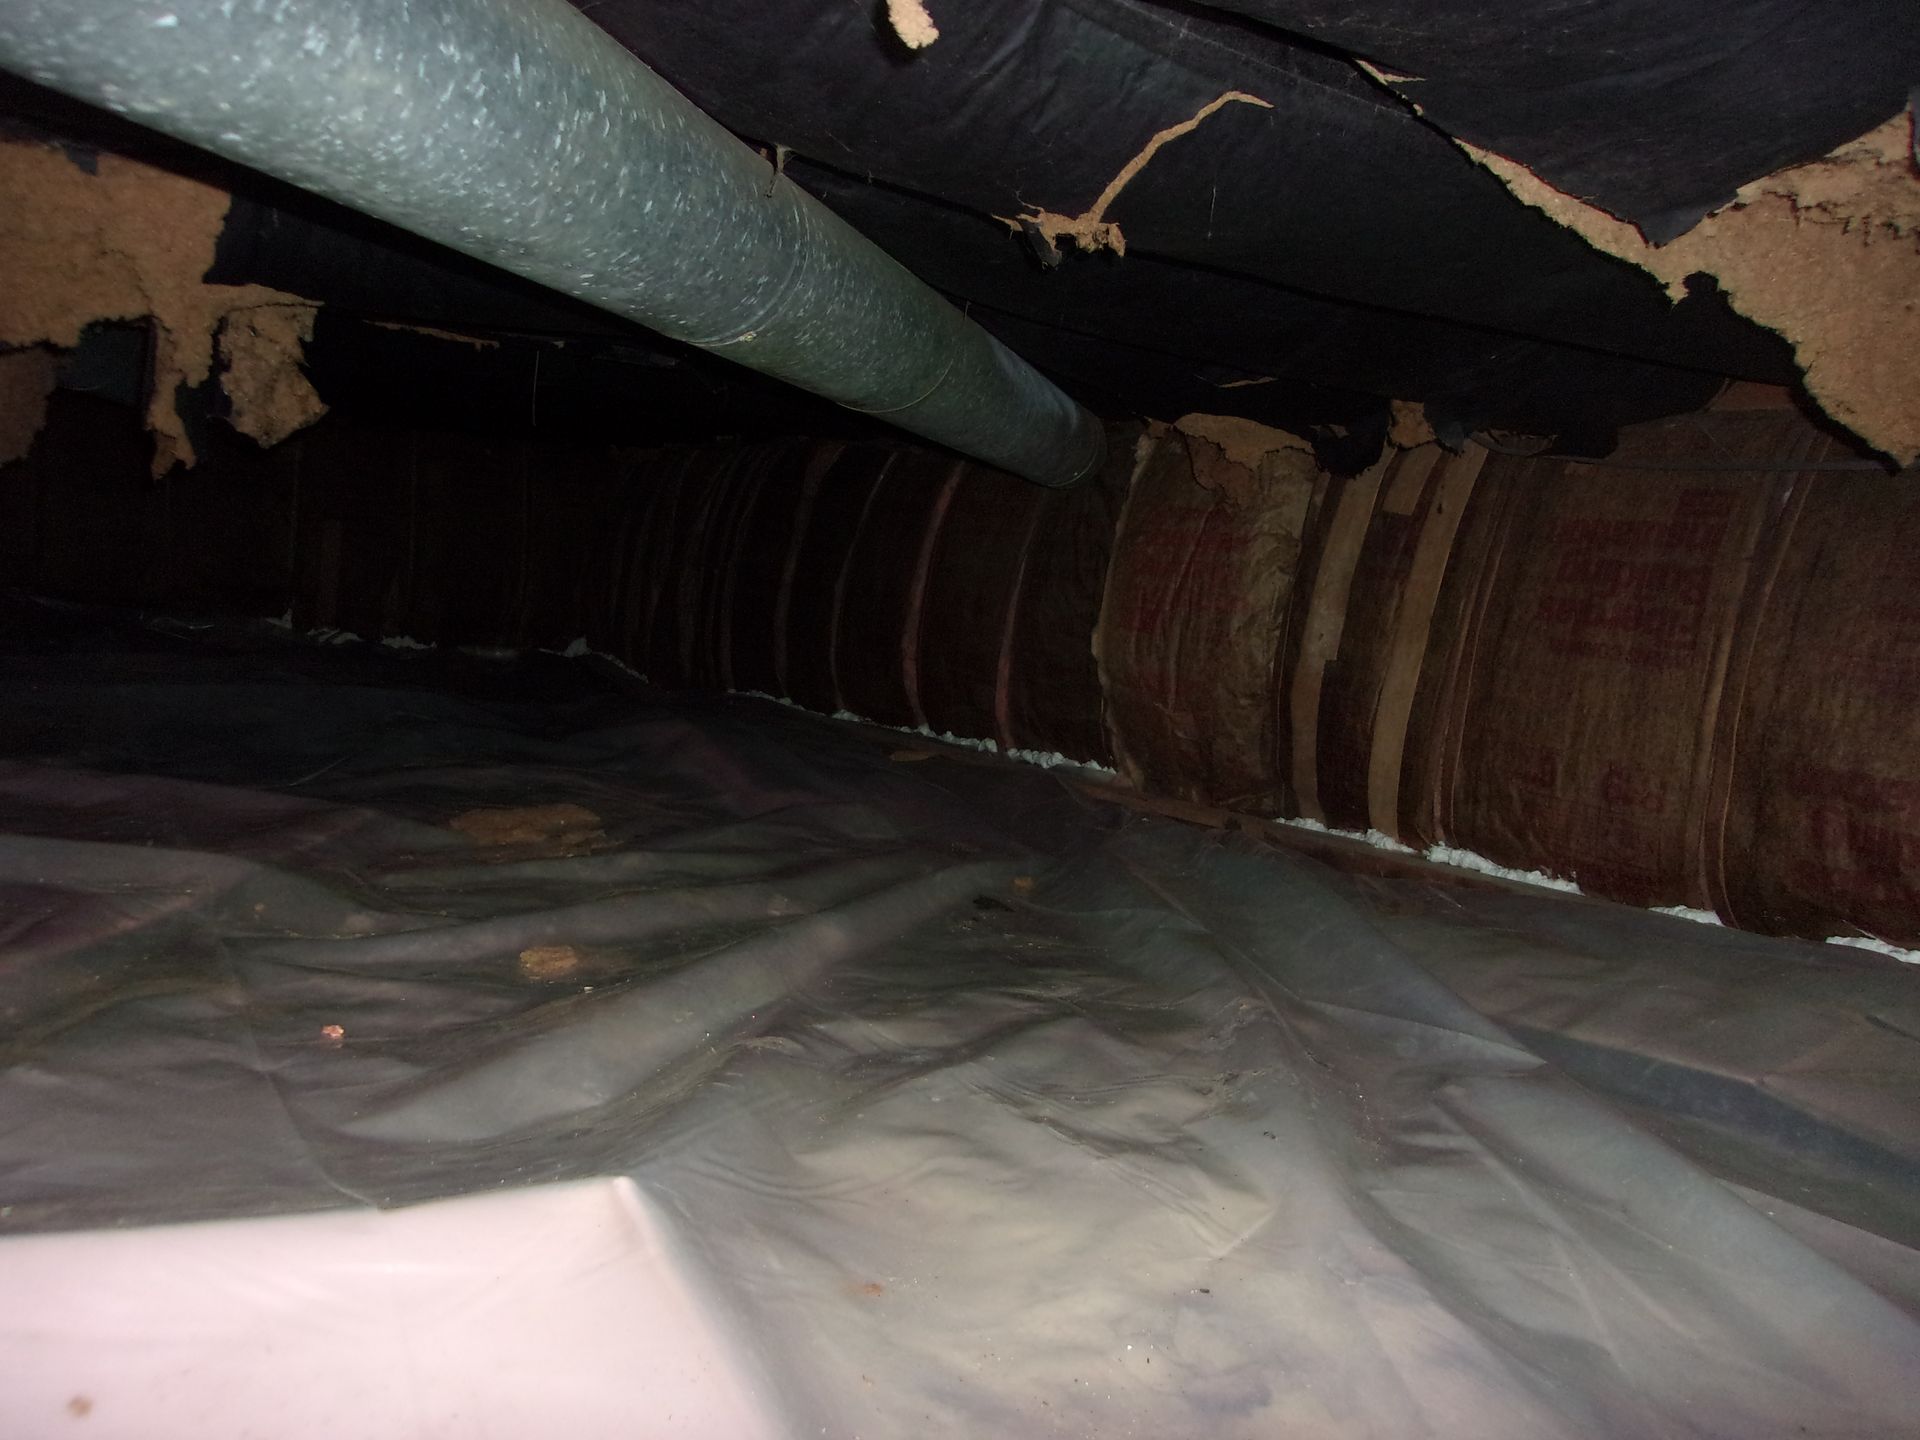 Failing and improperly deployed insulation underneath a mobile home